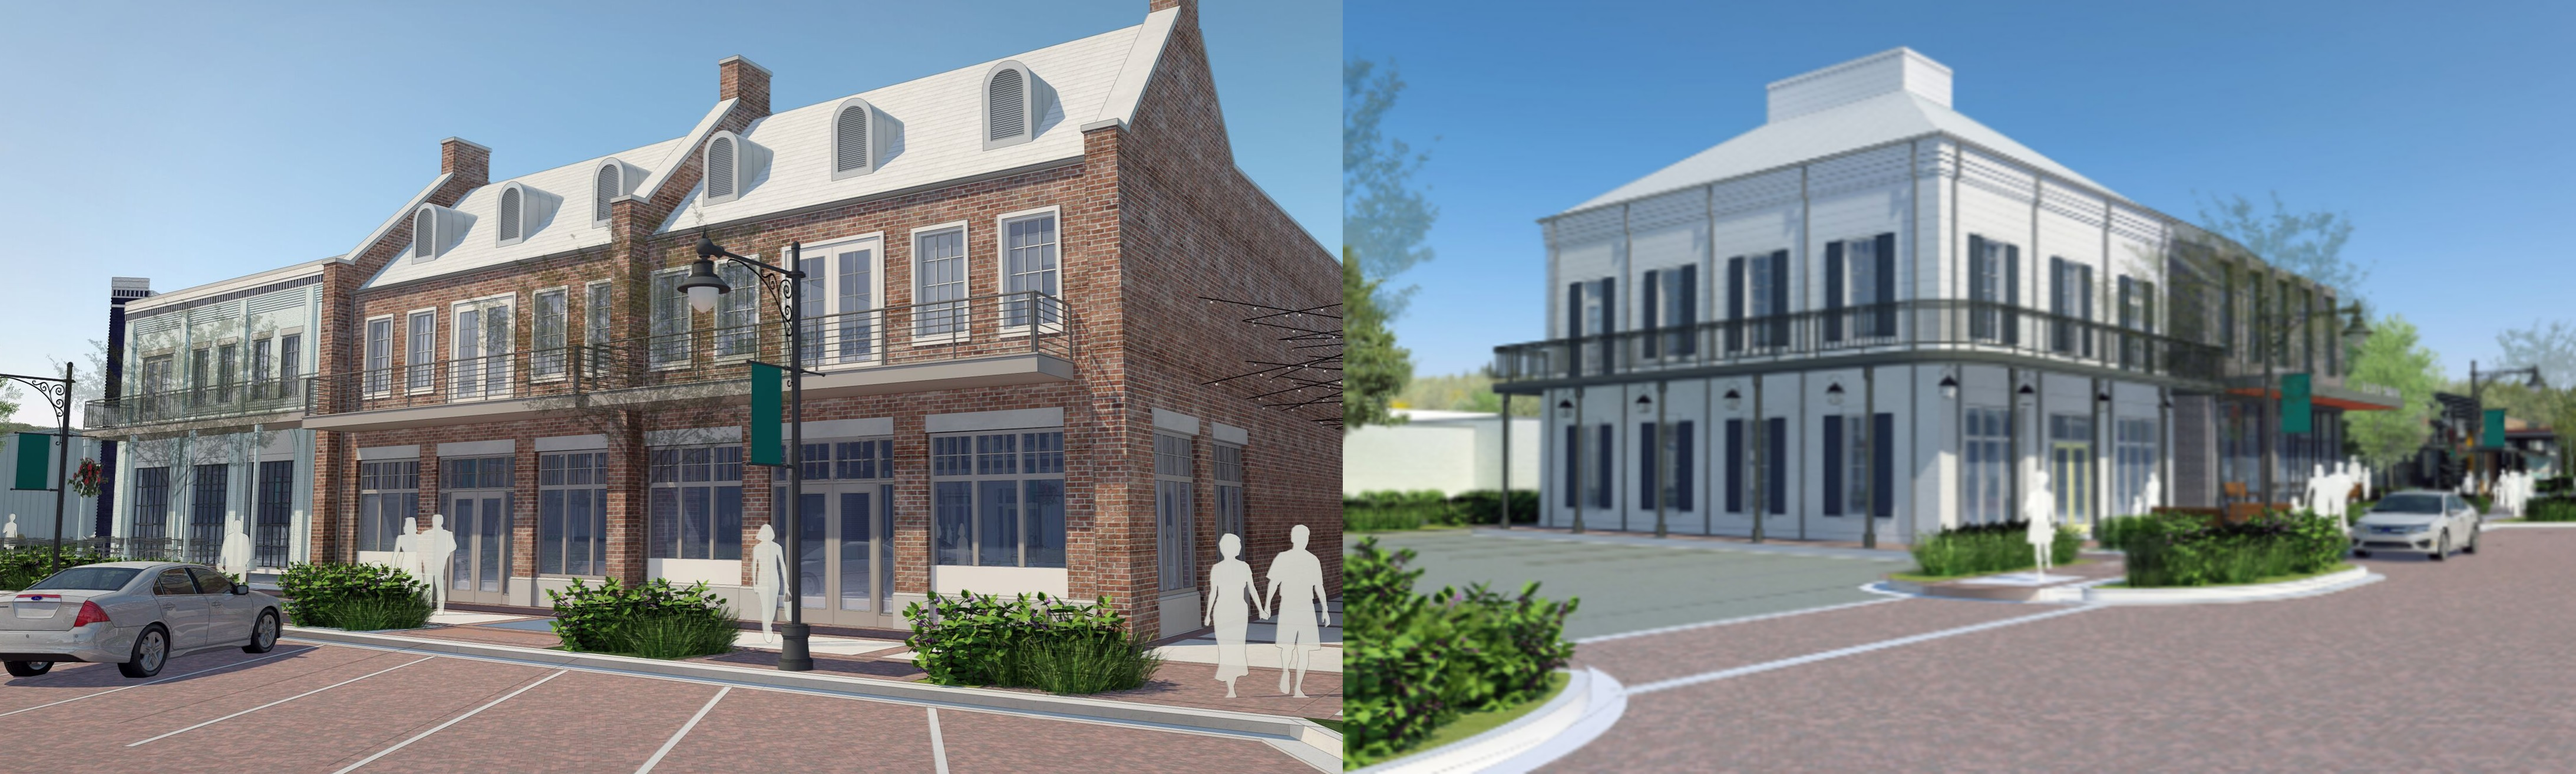 2 new buildings approved for downtown Trussville